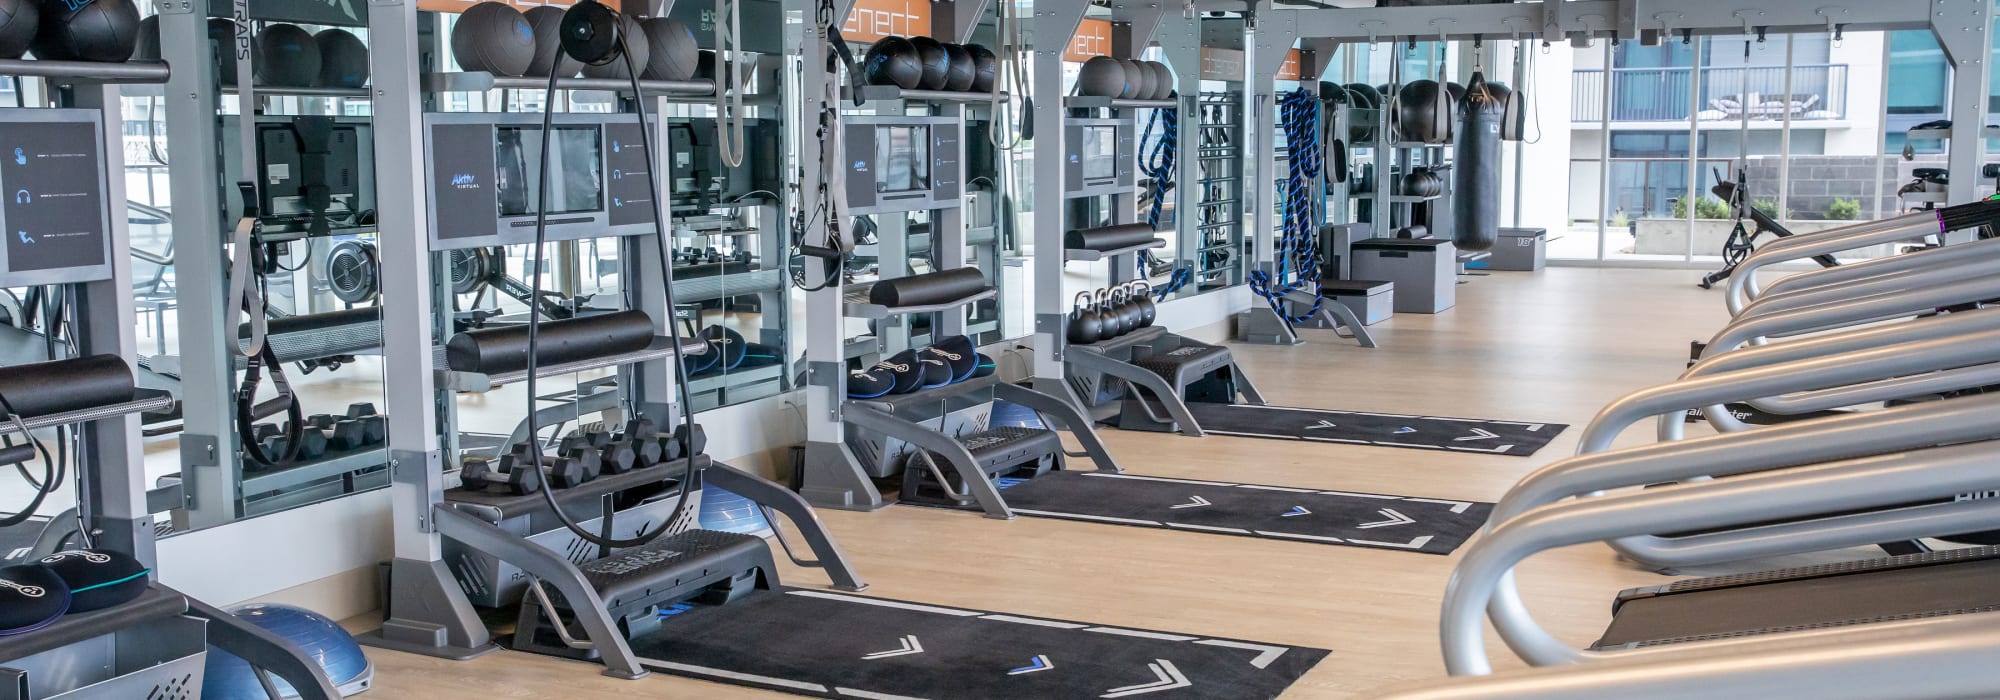 Fitness center at Kenect in Chicago, Illinois